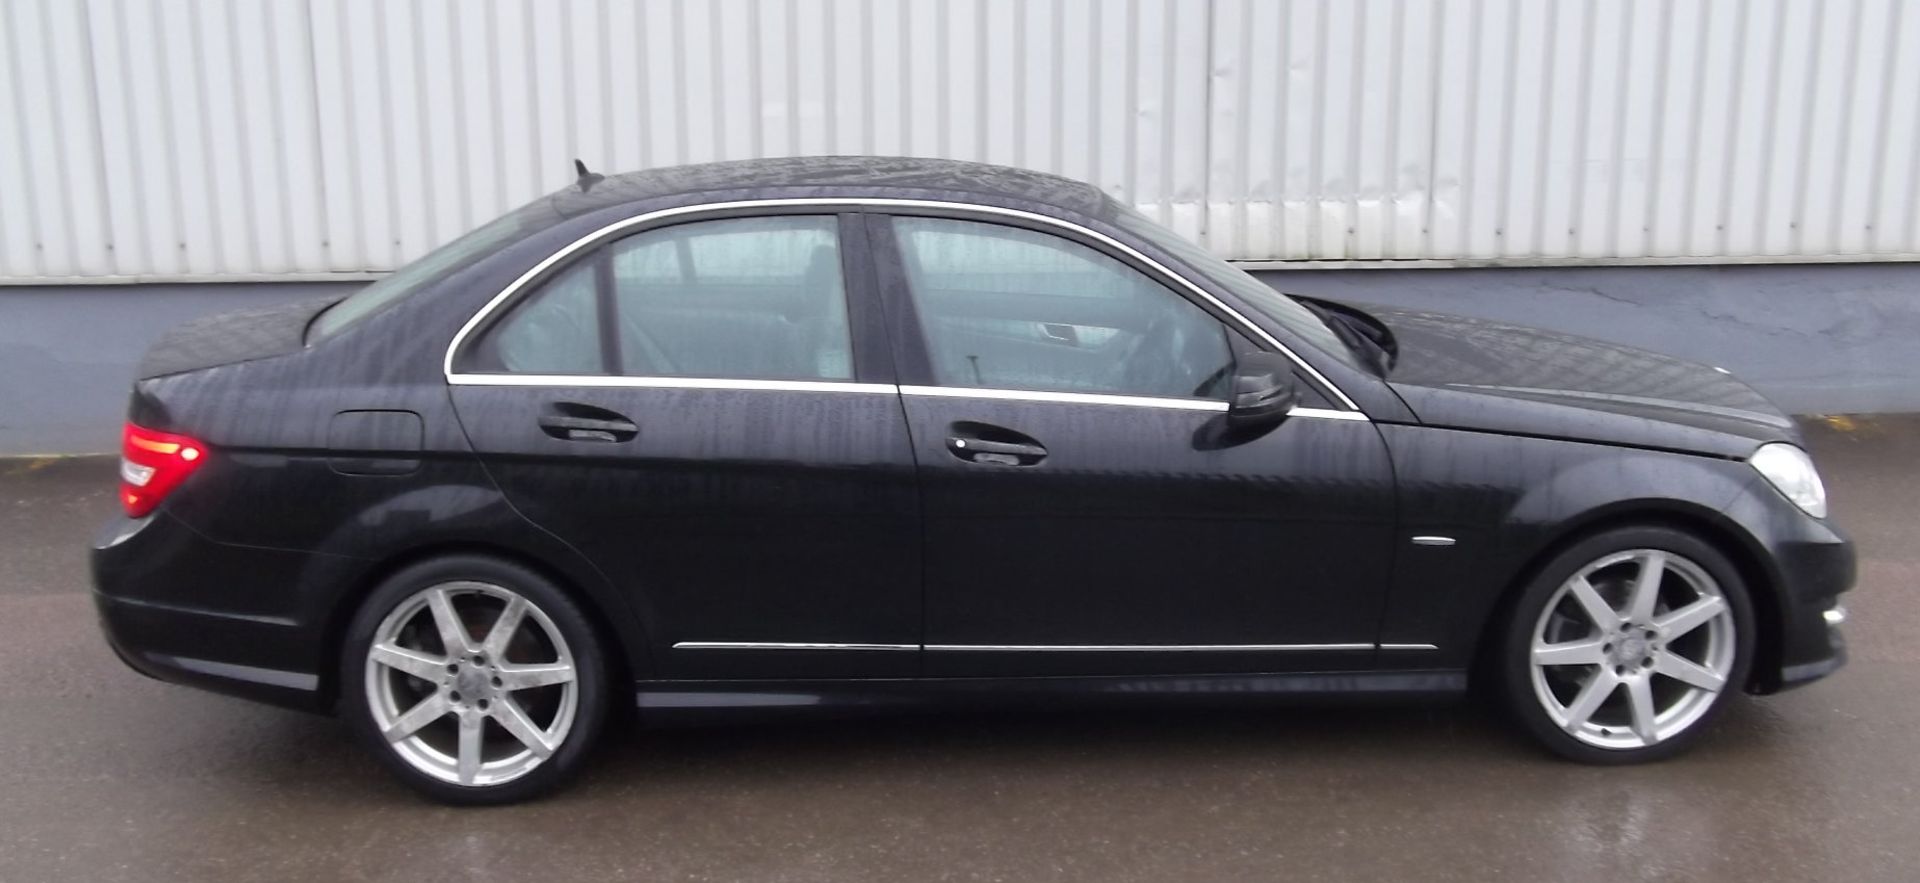 2011 Mercedes C220 CDI BlueEFFICIENCY Sport Edition 125 4dr Auto Saloon - CL505 - NO VAT ON THE HAMM - Image 16 of 21